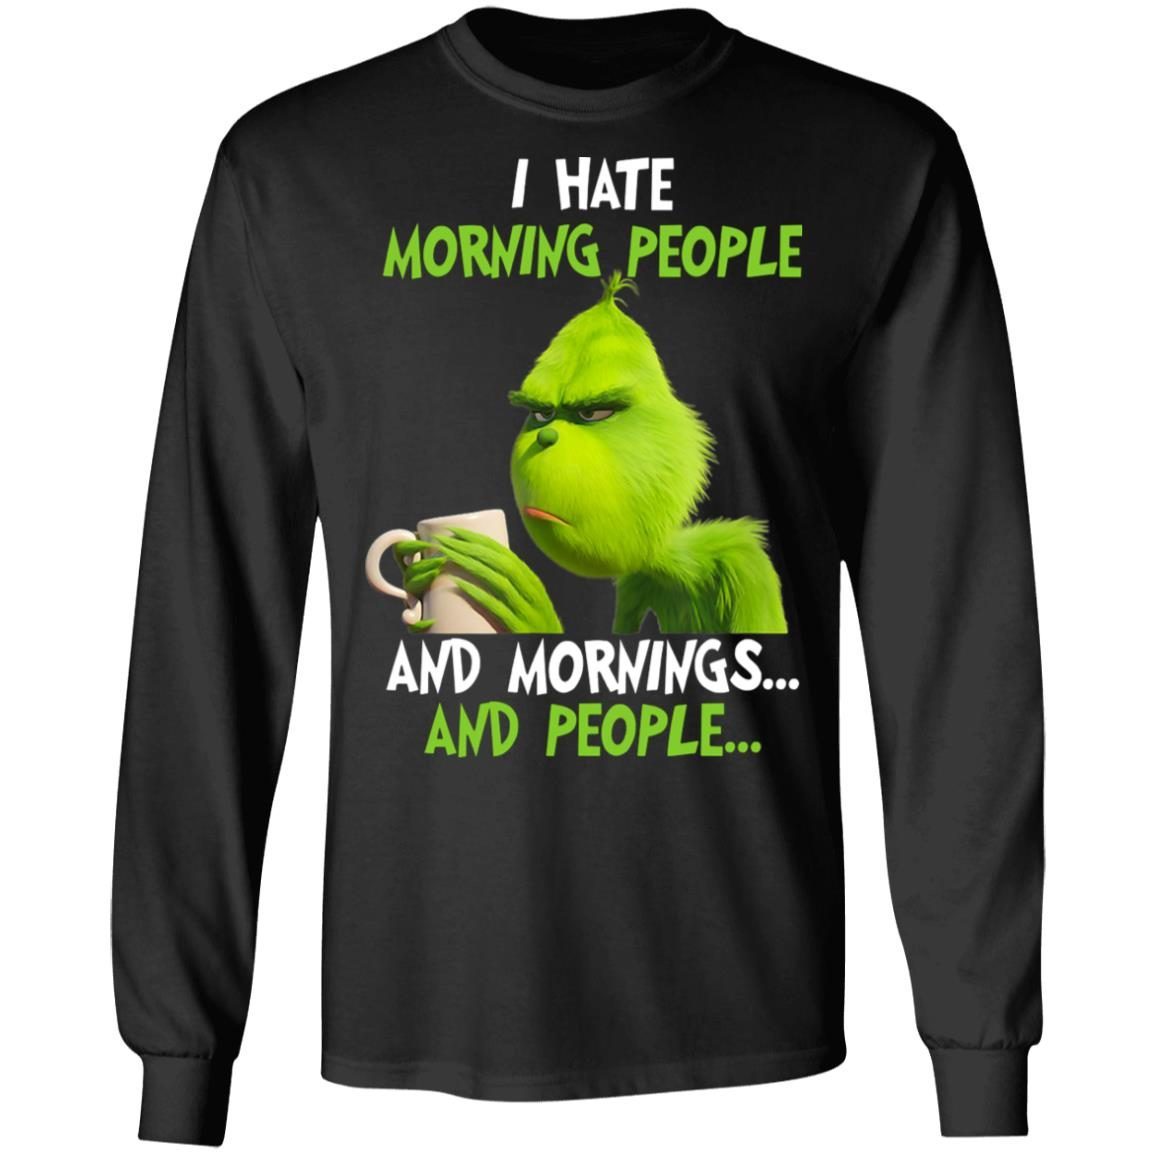 The Grinch I Hate Morning People and Mornings and People shirt